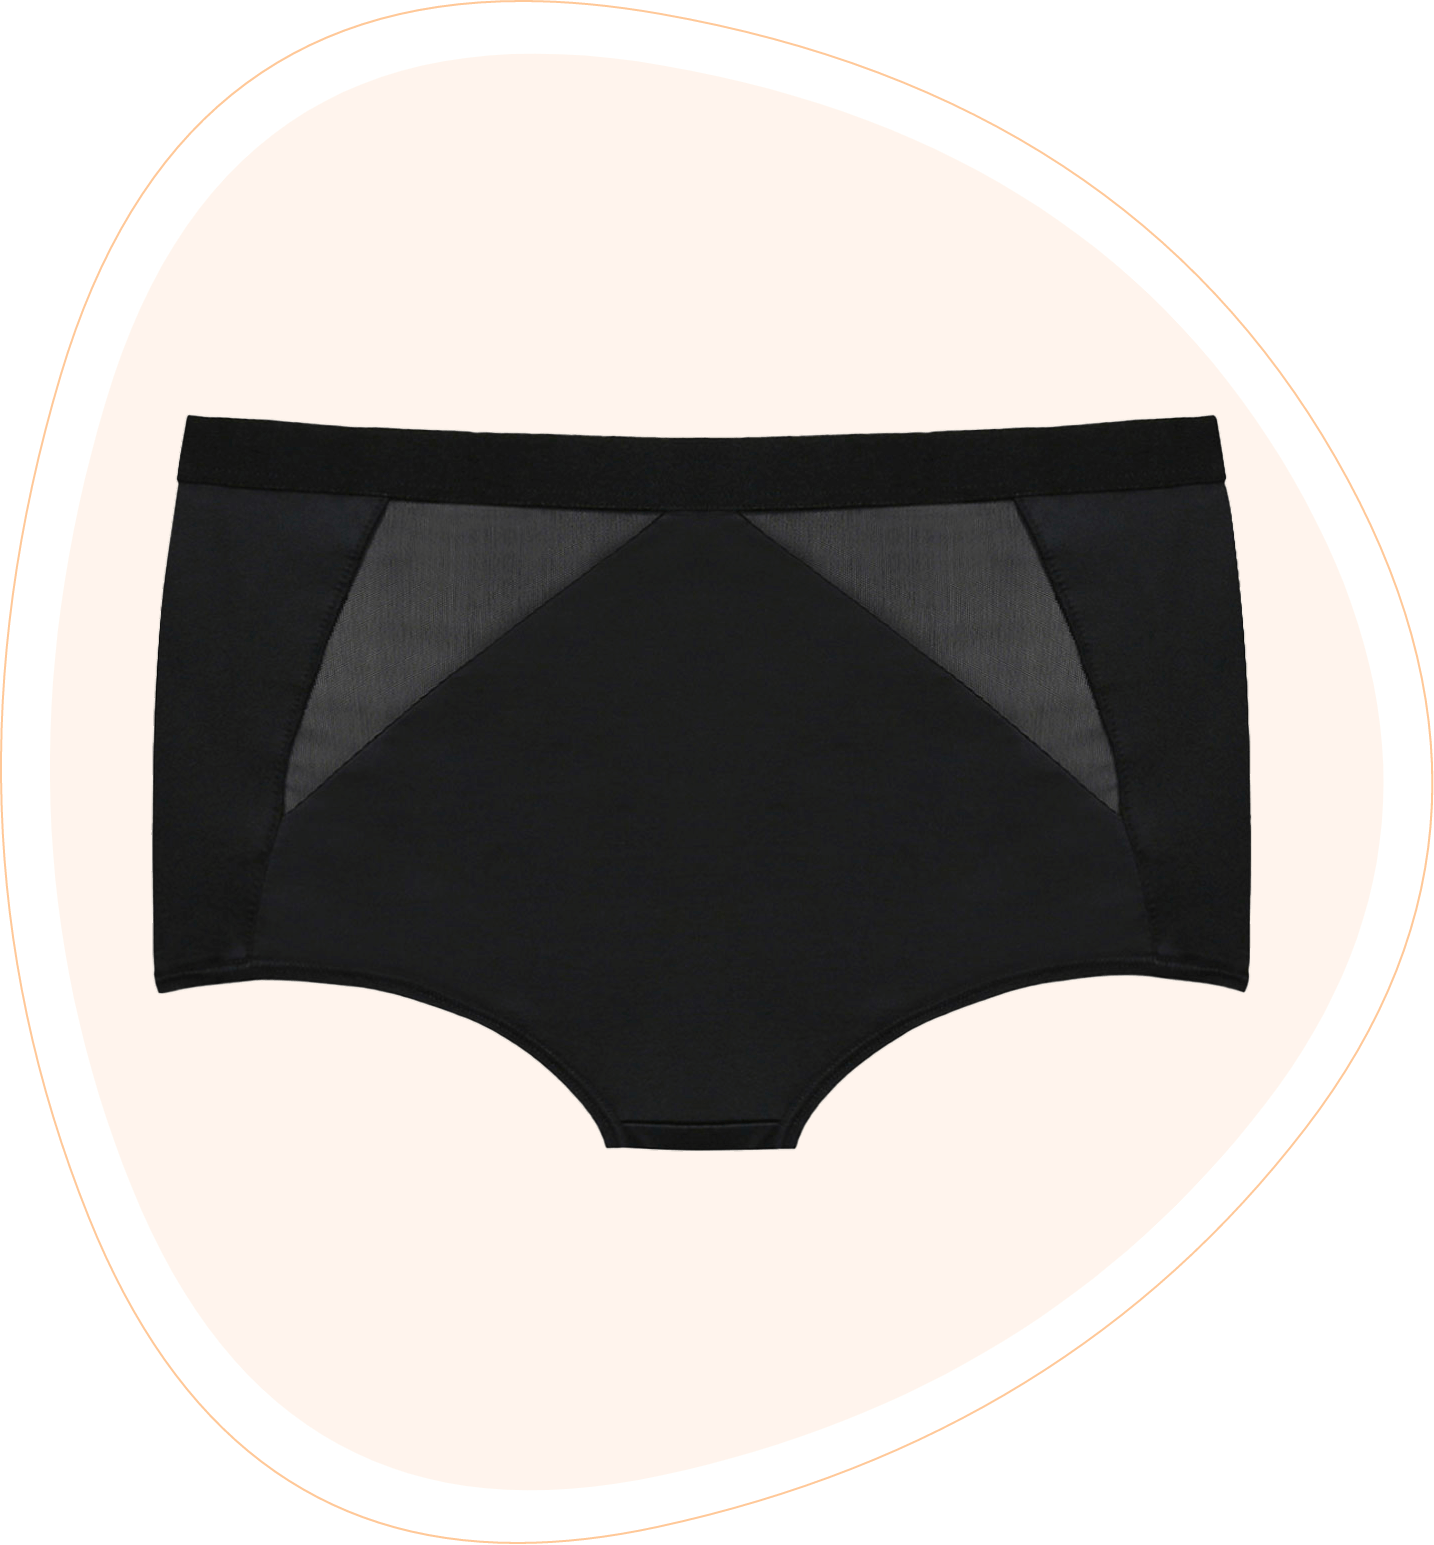 Playtex Women I Can't Believe It's a Girdle High Waisted Plain Shaping  Control Knickers, Black,12 UK (70EU) : : Fashion